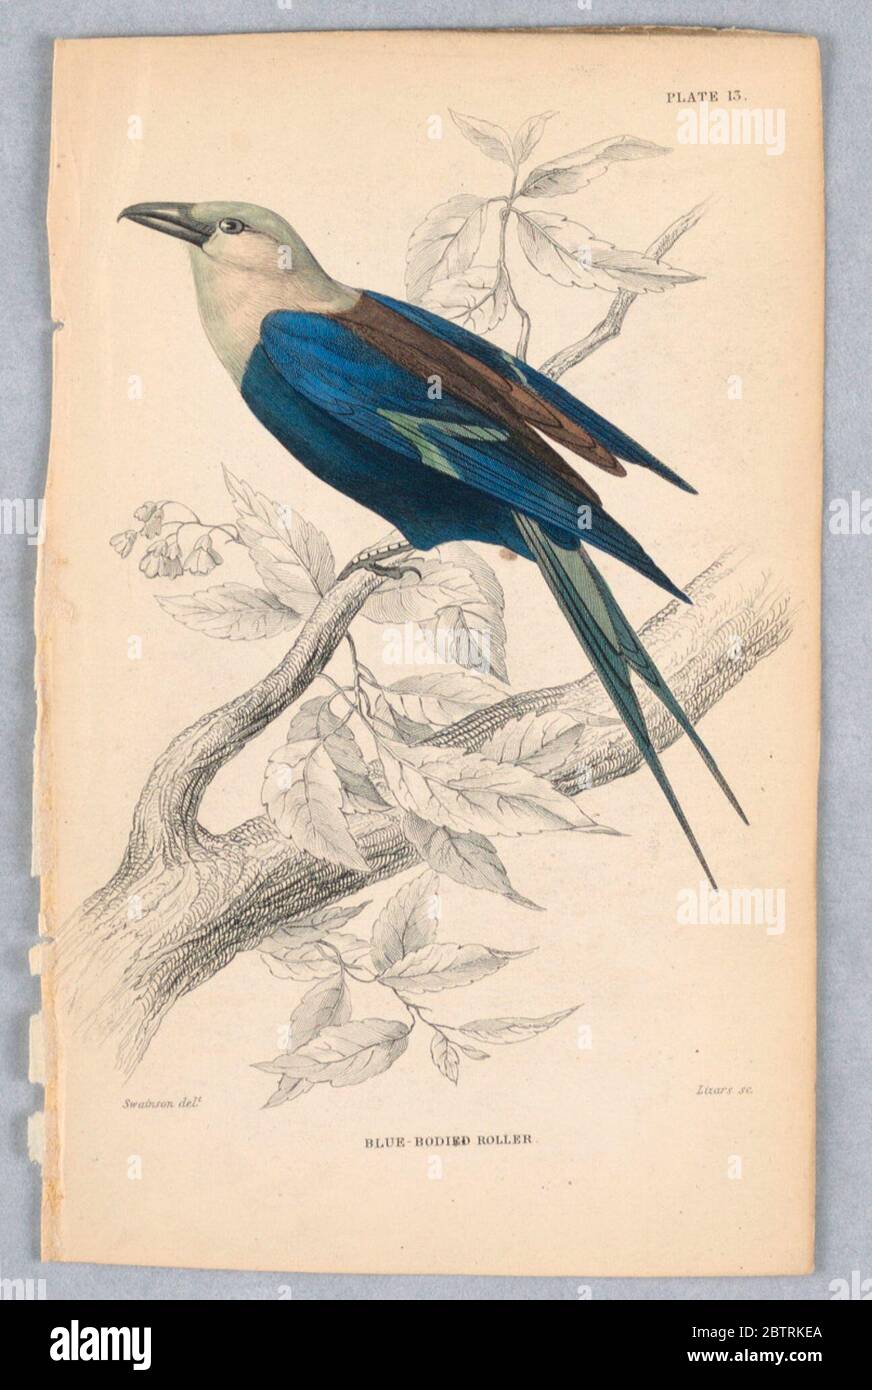 BlueBodied Roller Plate 13 from Birds of Western Africa. Research in ProgressWhite-headed bird in a flowering tree branch. He has a blue body and wings, a brown back, and a green tail; green wing bars. Title and artists' names below. Stock Photo